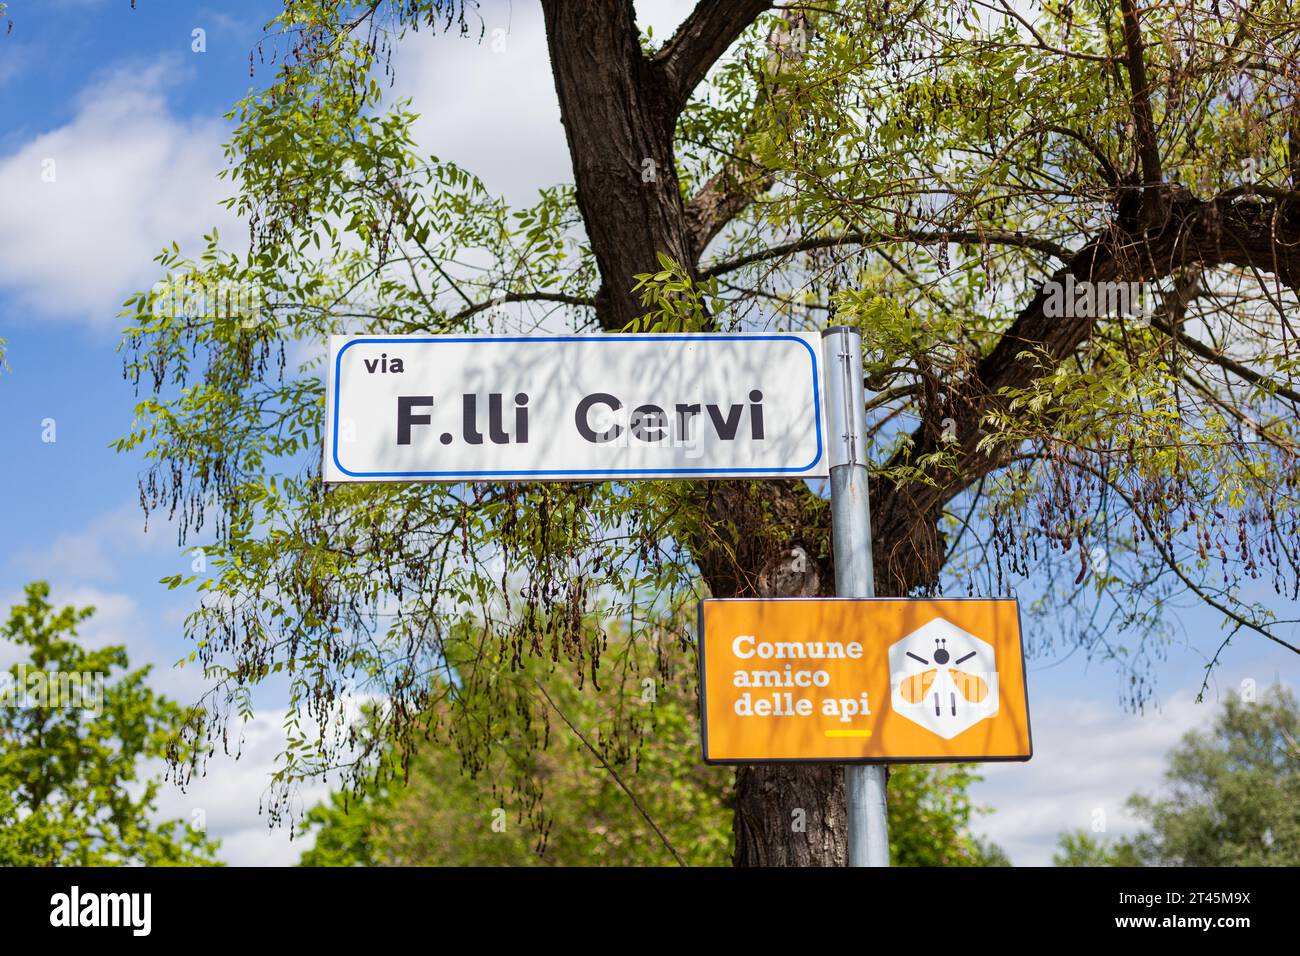 Gattatico, Reggio Emilia, Italy - April 25, 2023: Close-up of Italian street signs dedicated to the Cervi Brothers executed by a firing squad. Symbol Stock Photo